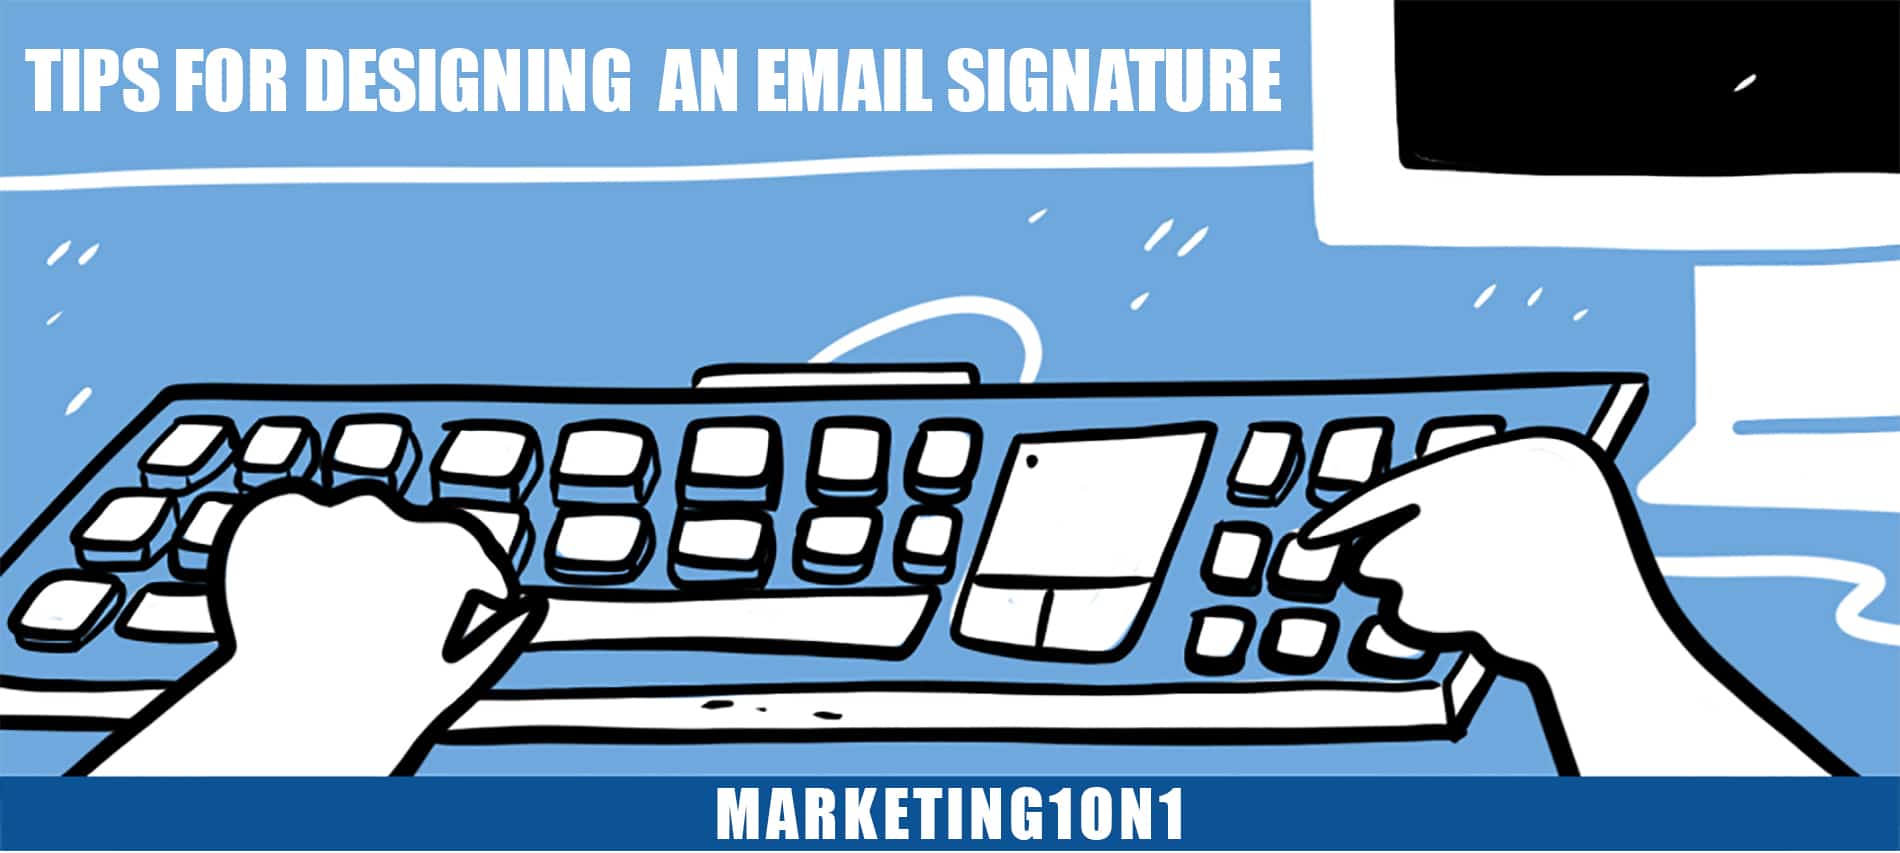 Tips for designing an email signature